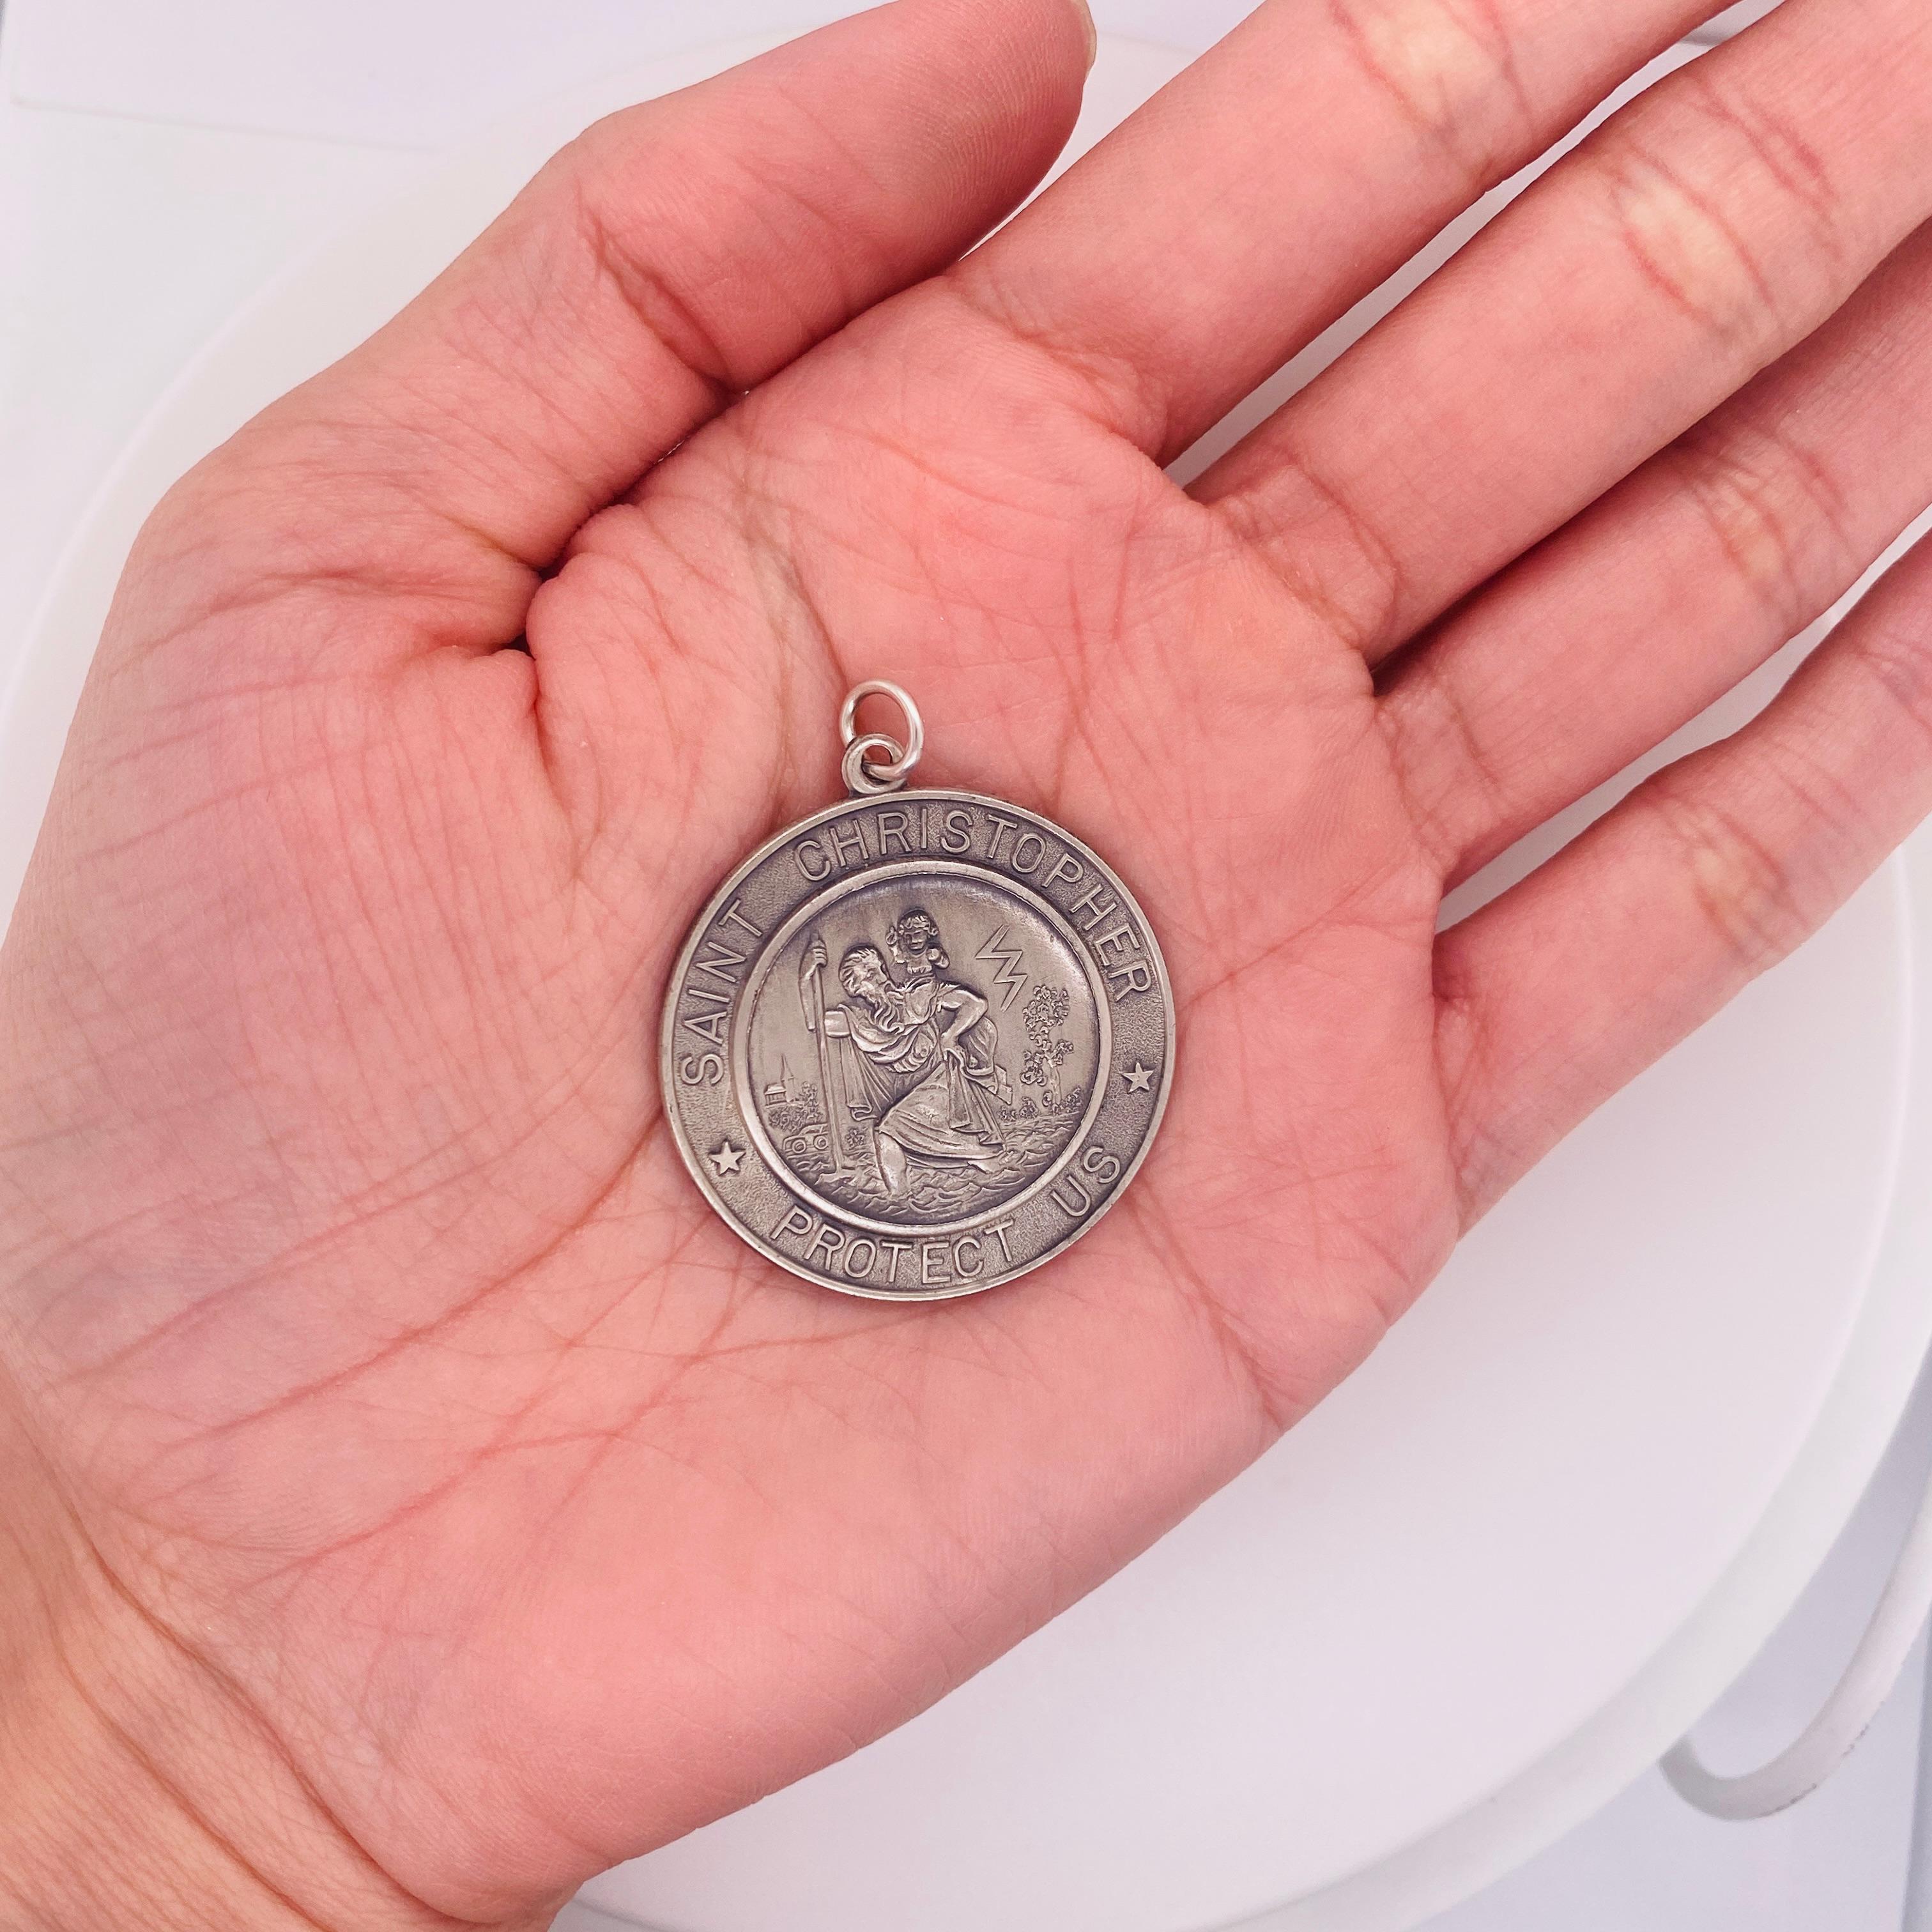 Wear this St. Christopher pendant to protect you. St. Christopher is the patron saint of travelers. Made in sterling silver, the pendant measures 1 1/4 inches in diameter (32 millimeters) and 1 5/8 inches (40 mm) in length from the top of the bail